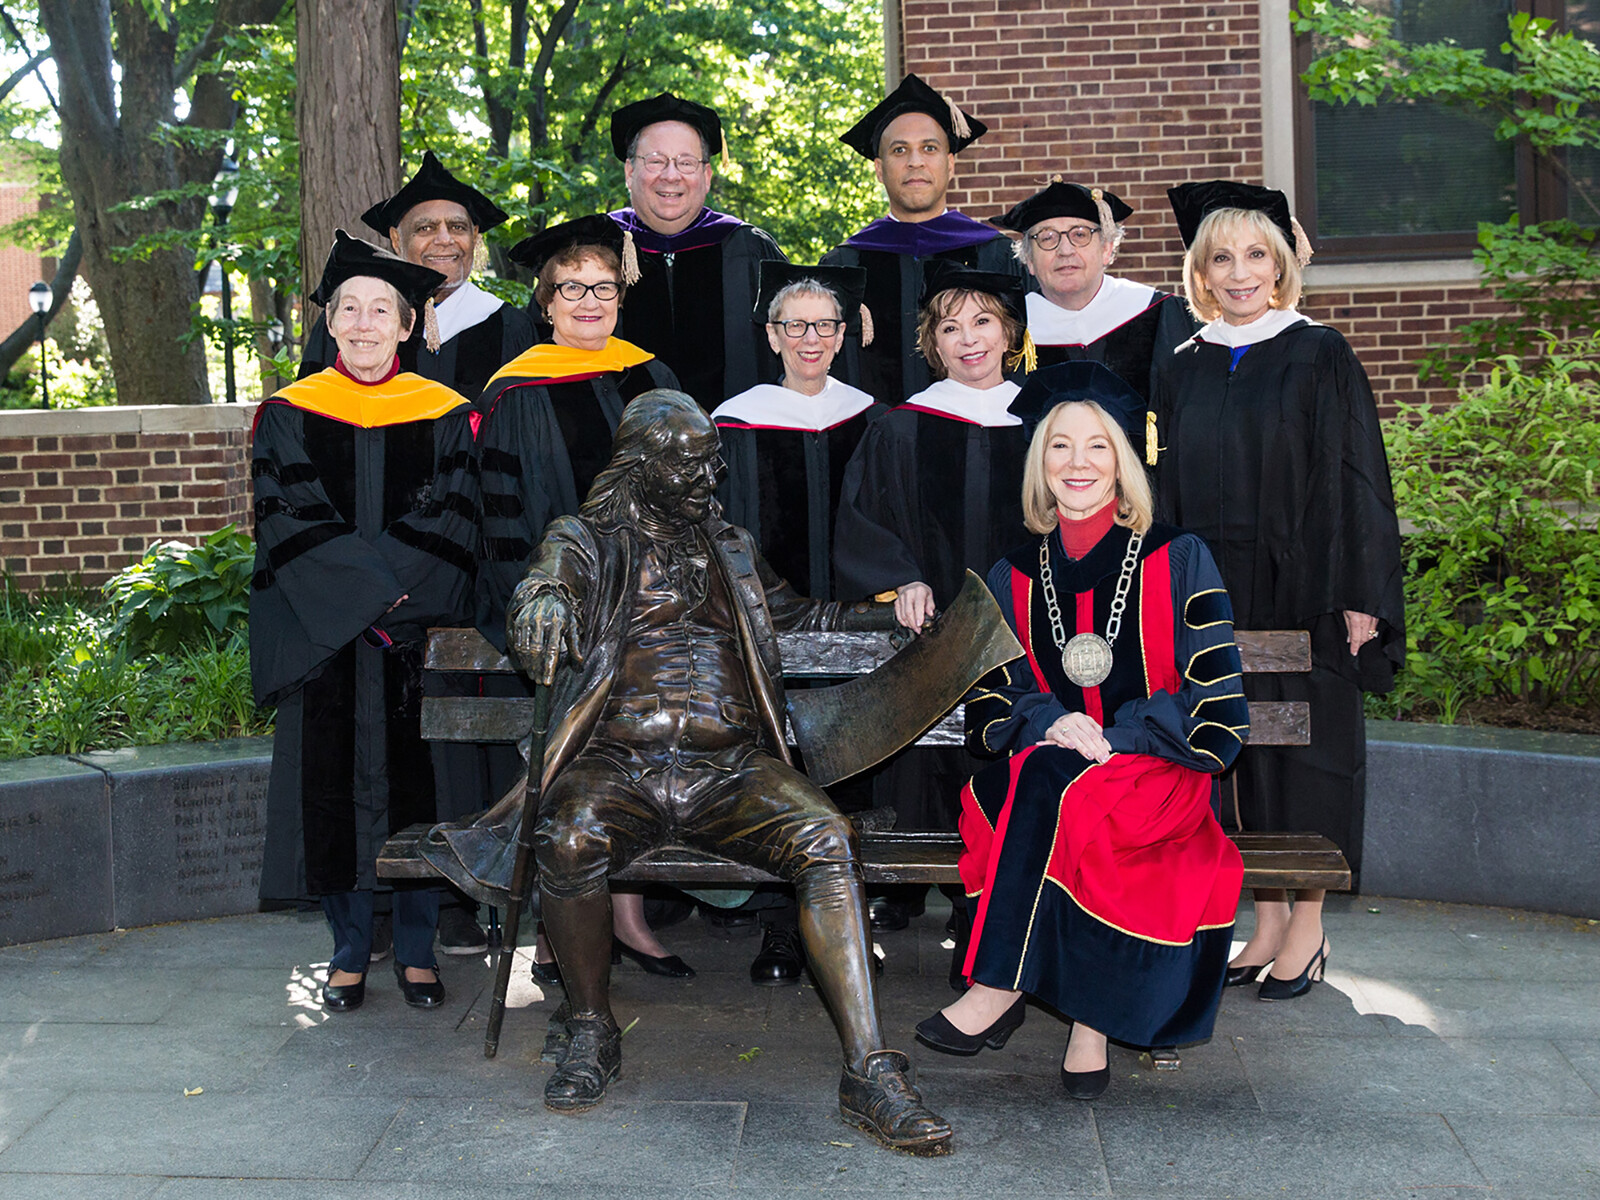 2017 Penn, Amy Gutmann and honorary degree recipients in regalia